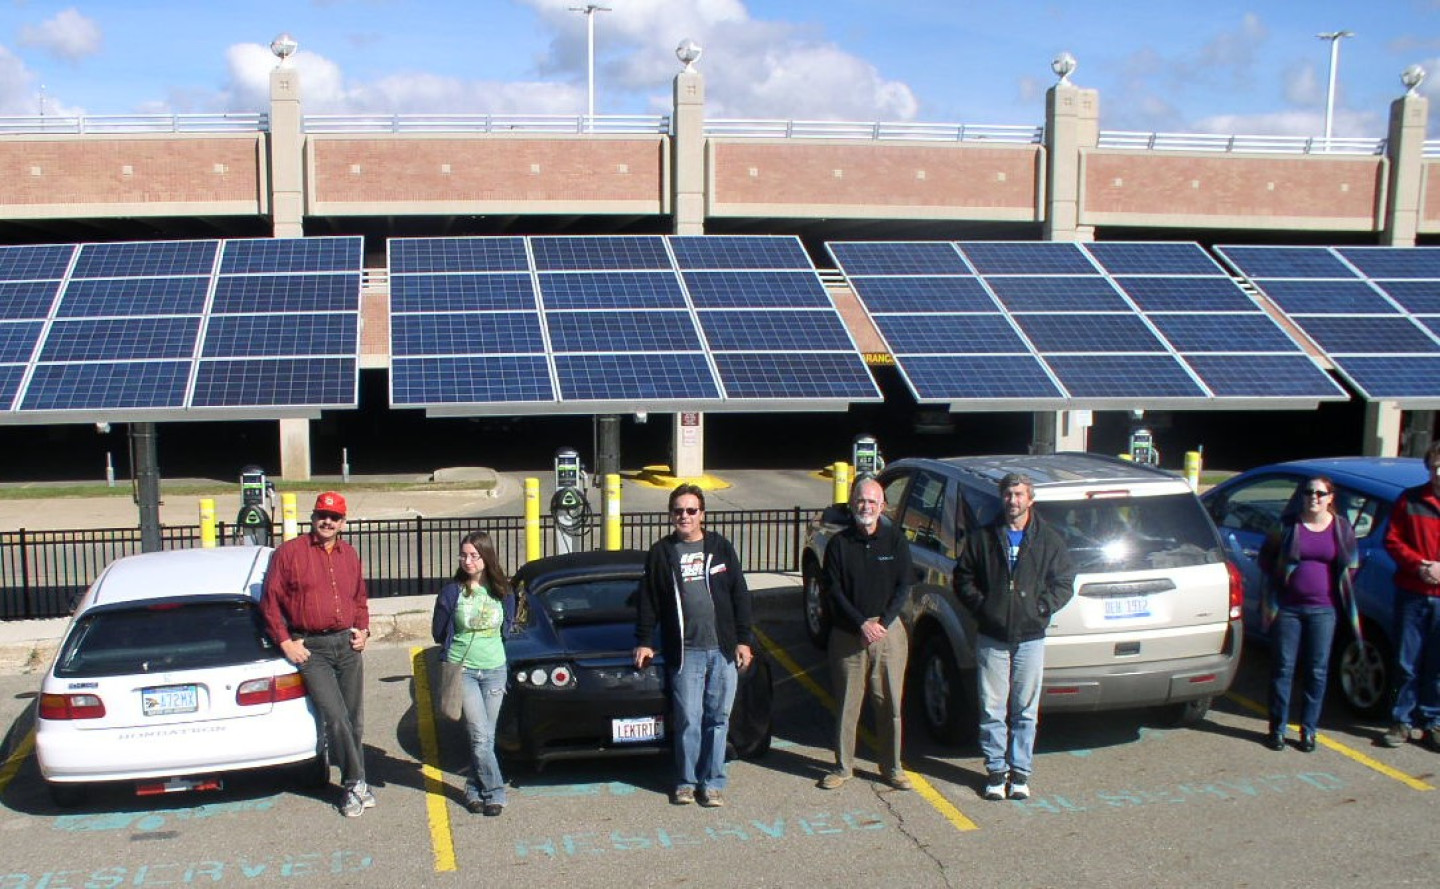 A group of people stand next to cars under a solar array.